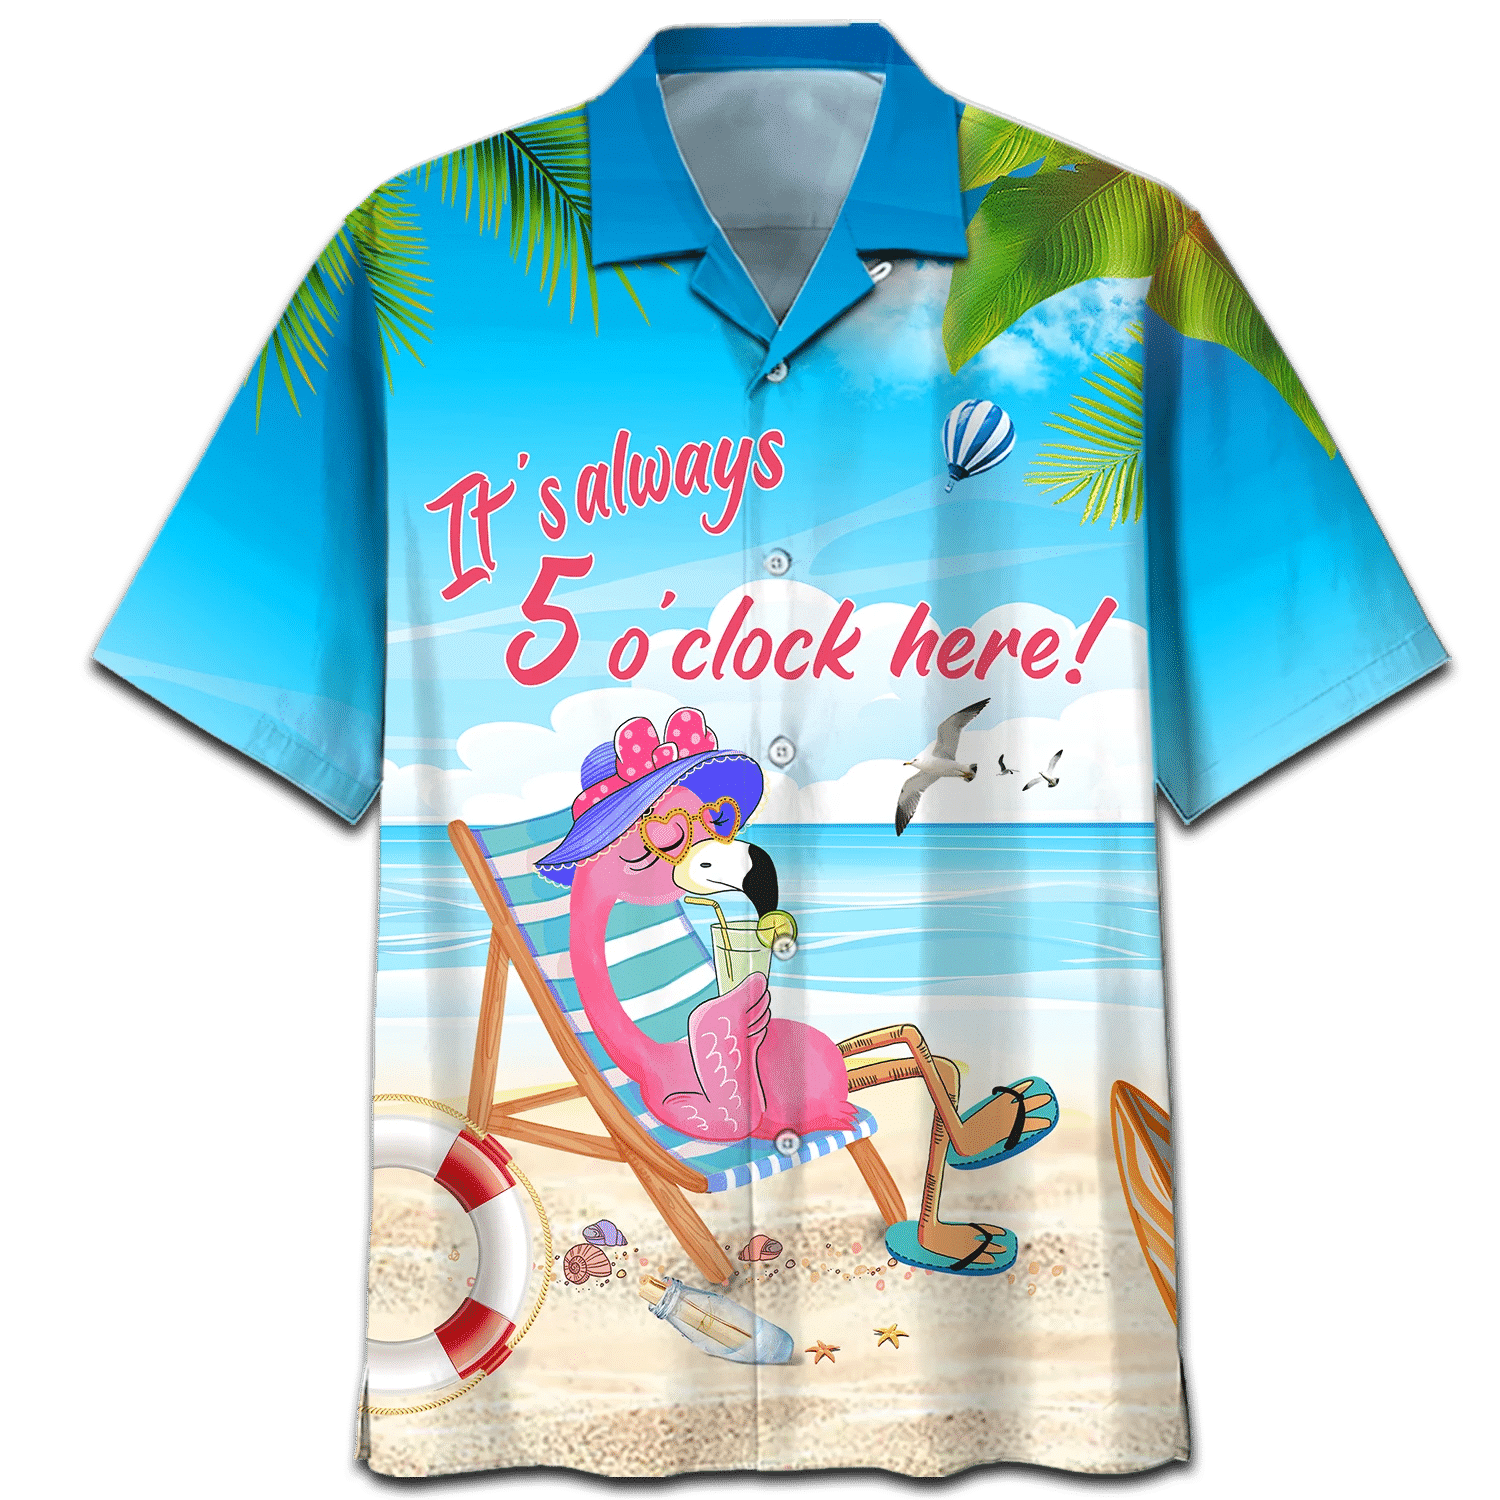 Choose from the many styles and colors to find your favorite Hawaiian Shirt below 39